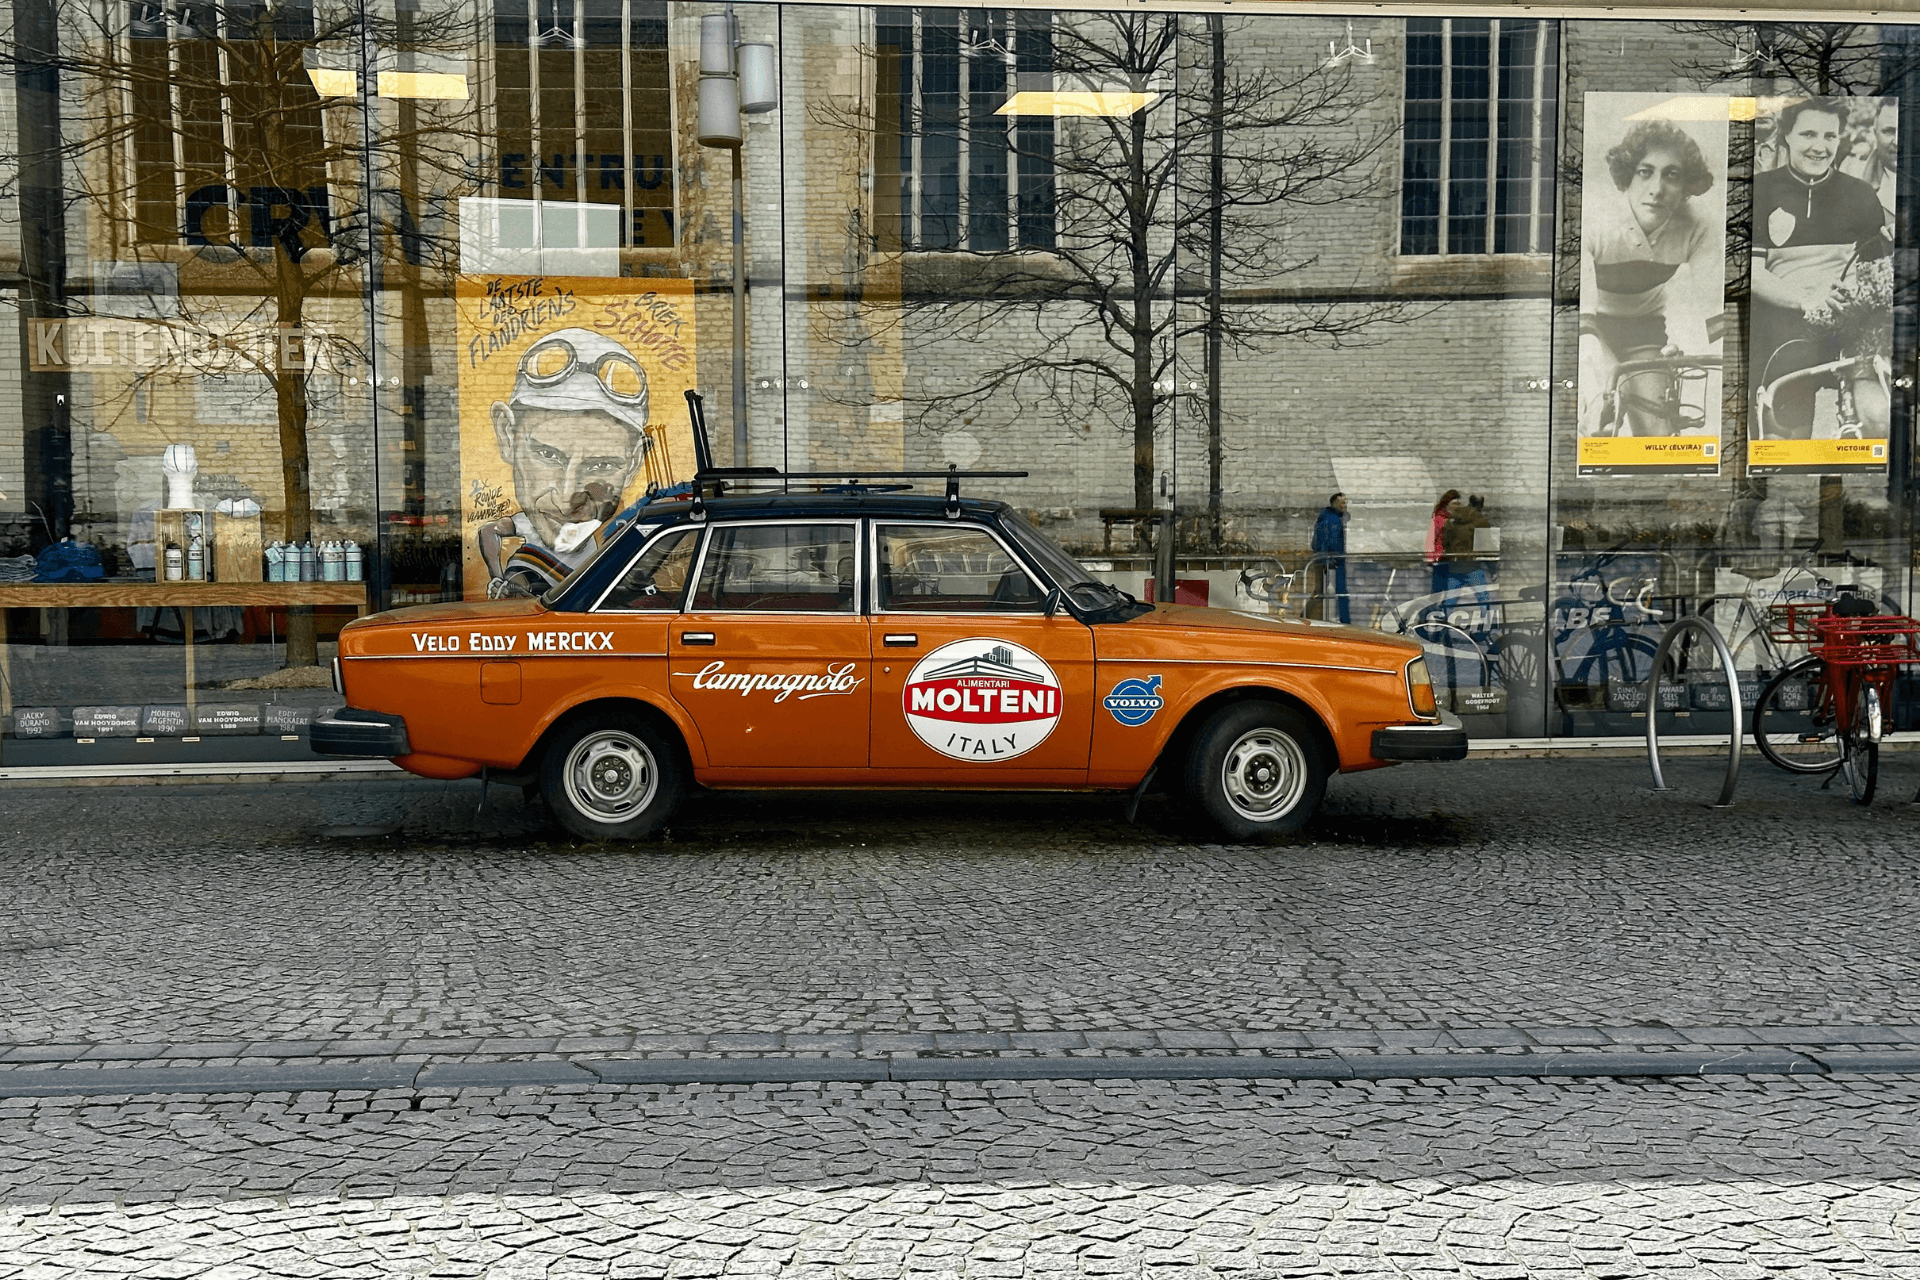 A 70s era Volvo sporting Molteni and Campagnolo decals parked out front of a building with large glass frontage